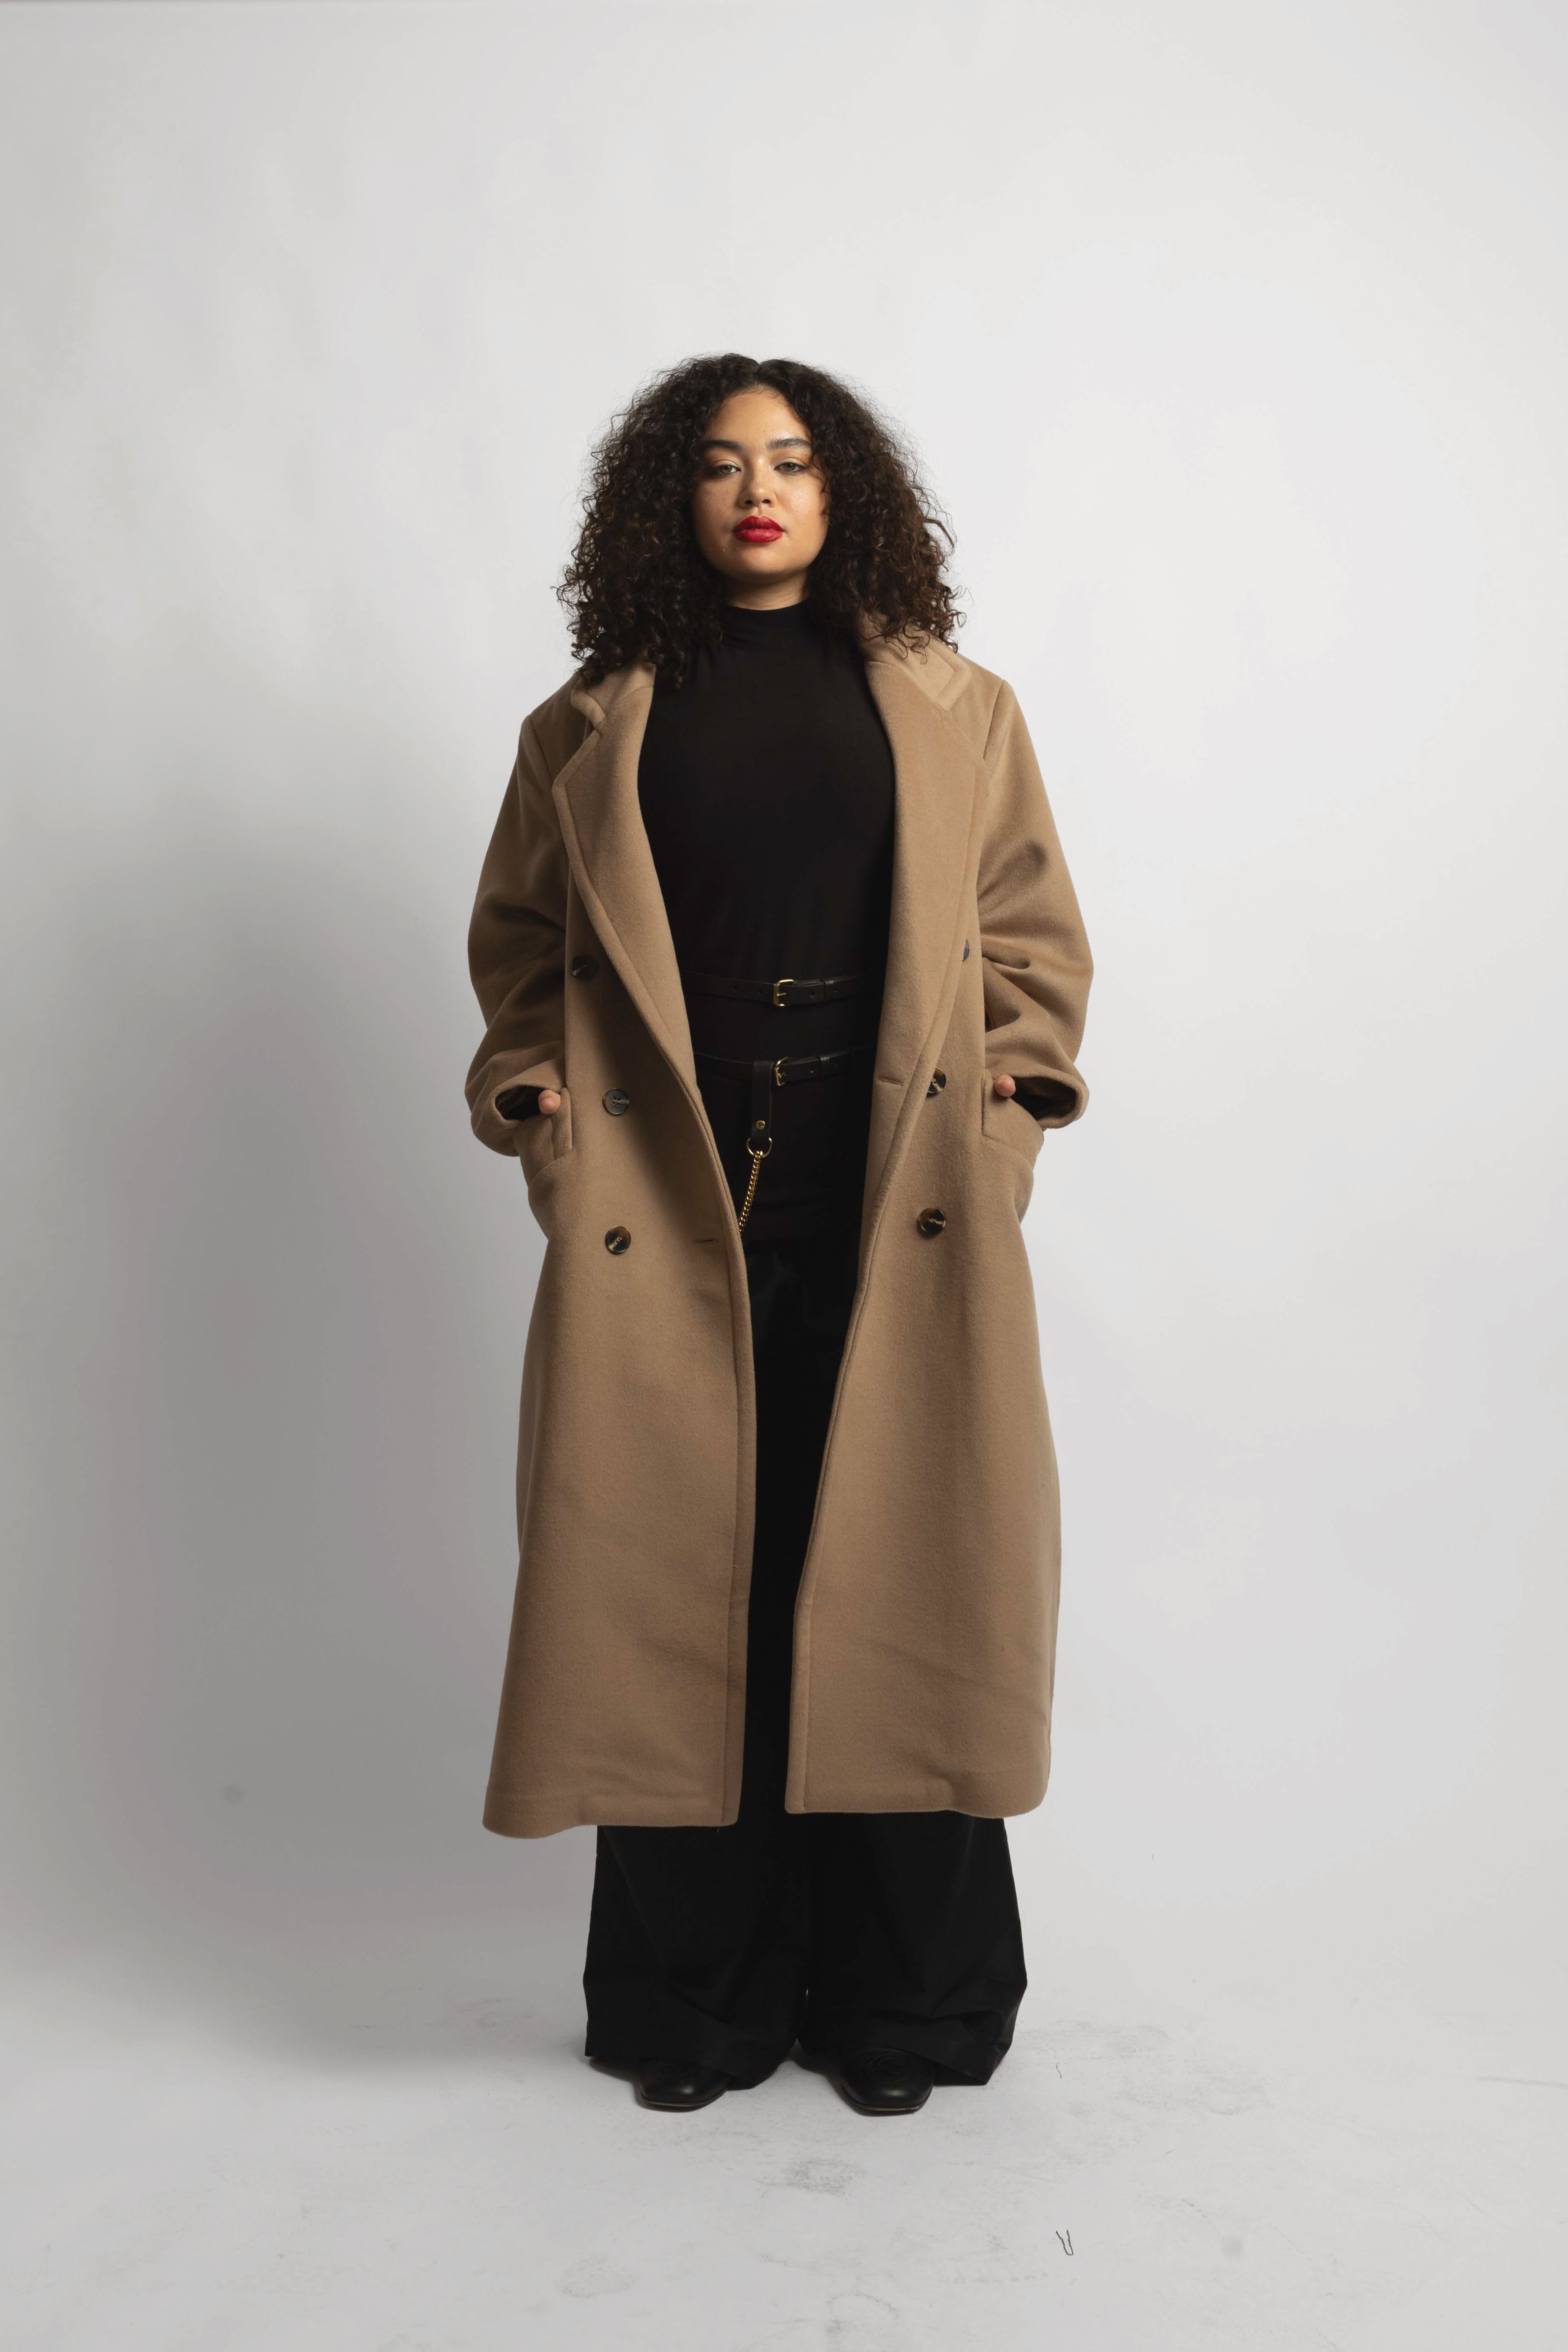 model wearing soft camel coat with hands in her pocket